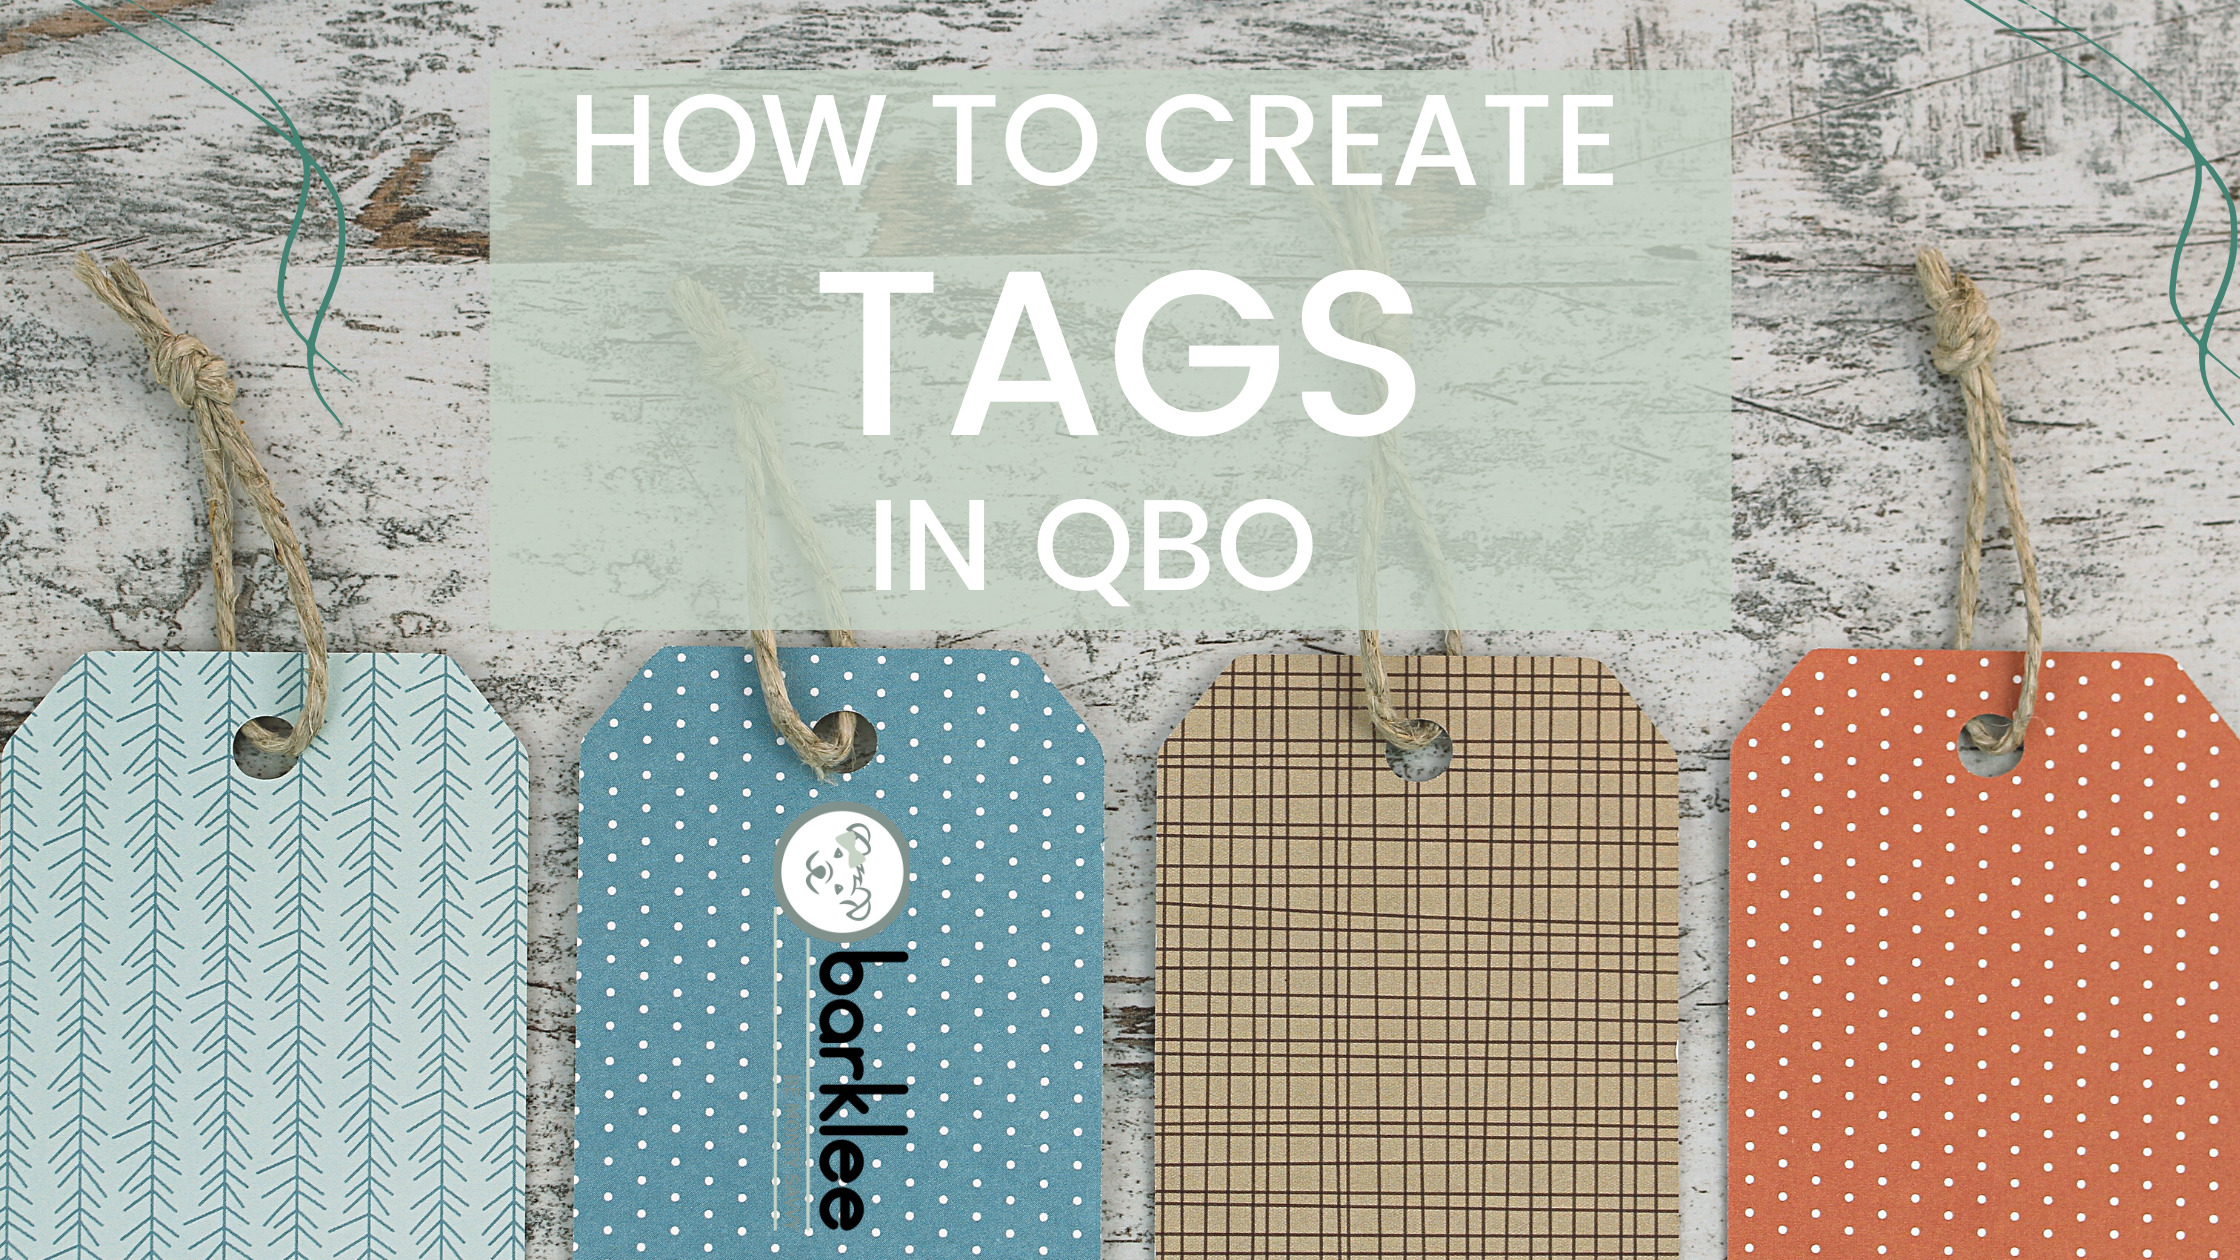 How tags in QBO can help you track your money